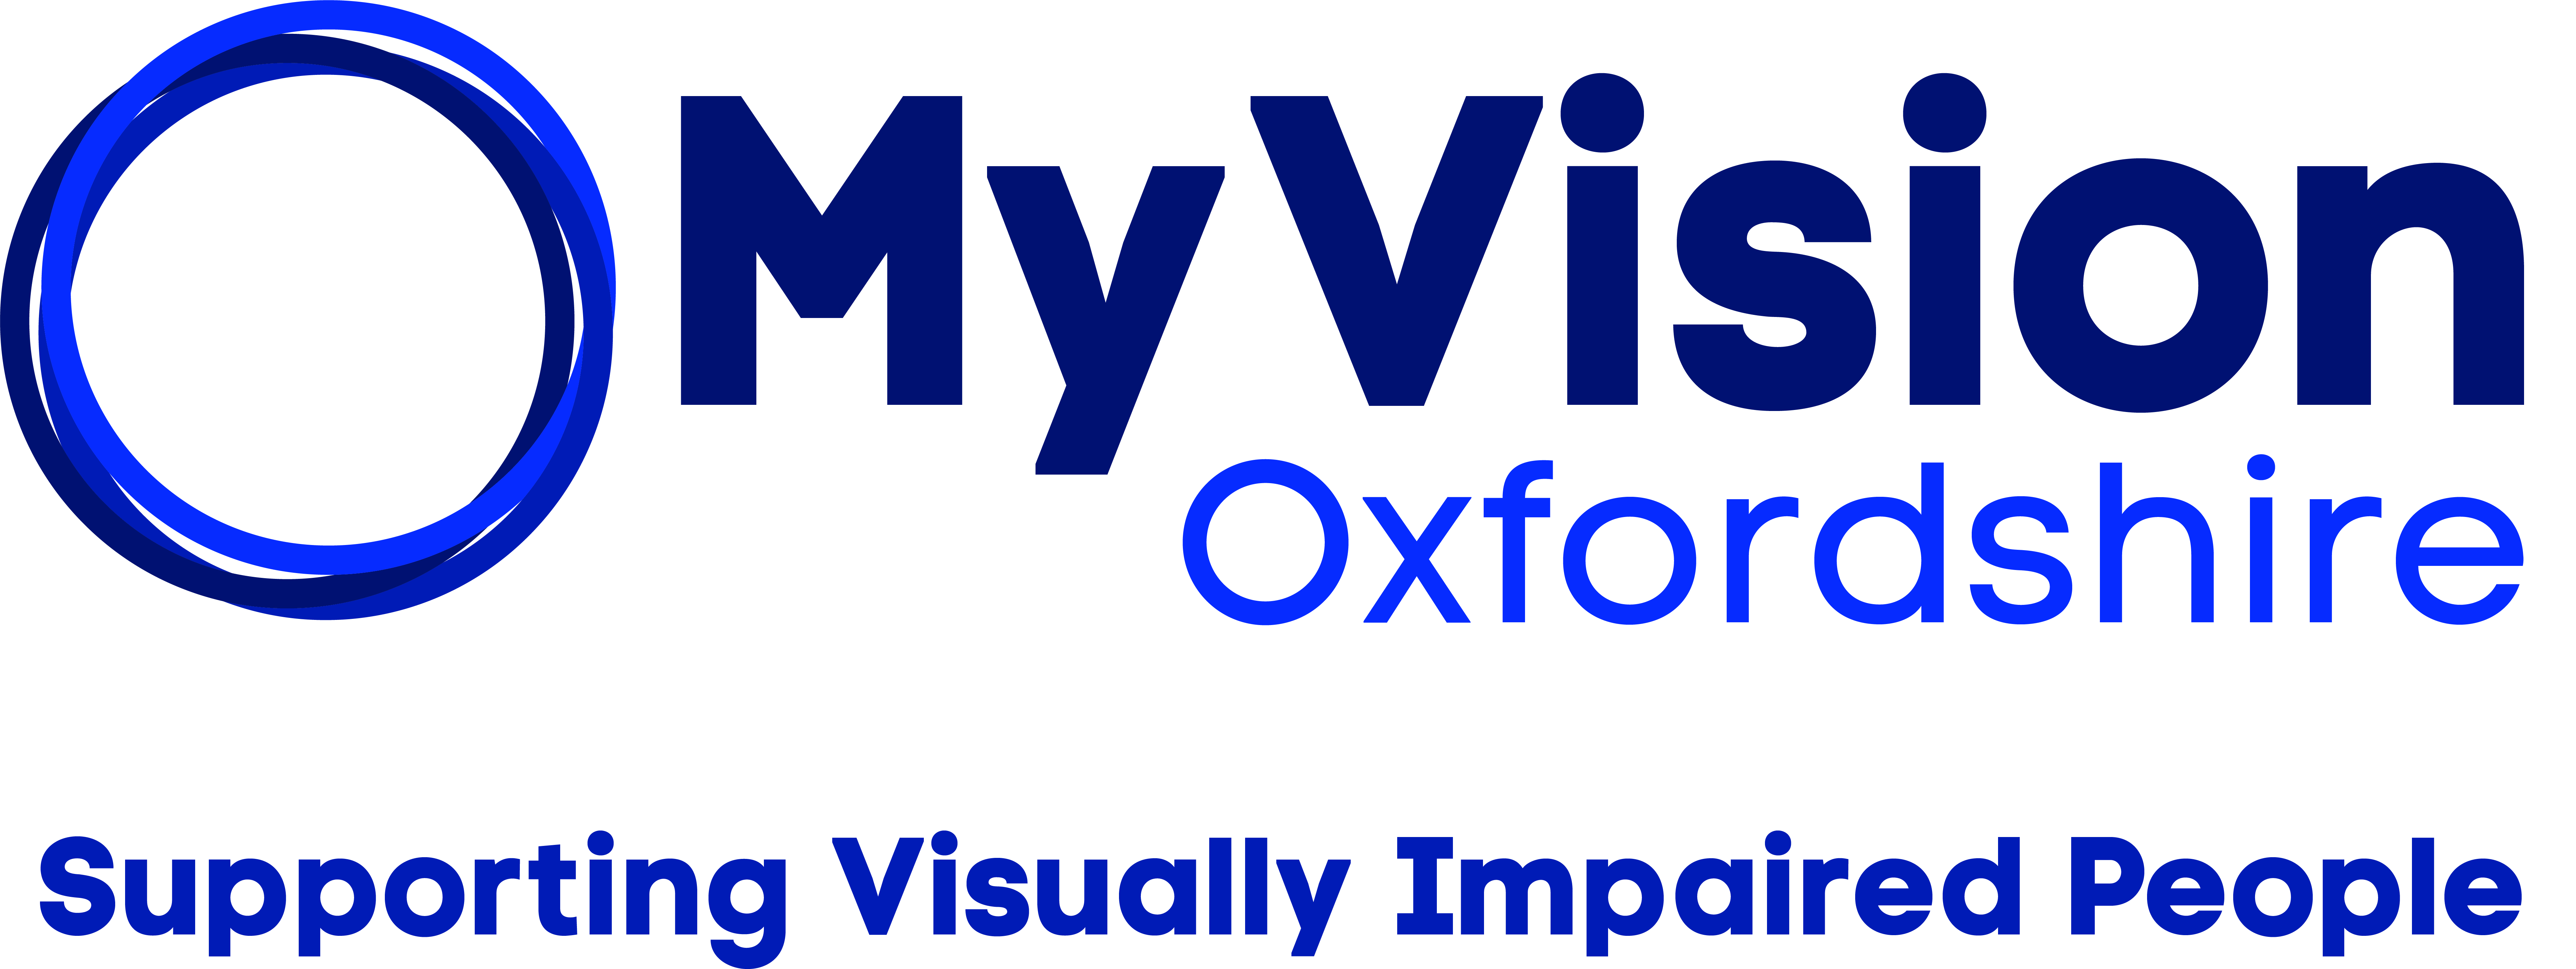 MyVision logo, 3 rings intersecting to the left of the words MyVision Oxfordshire with the strapline Supporting Visually Impaired People